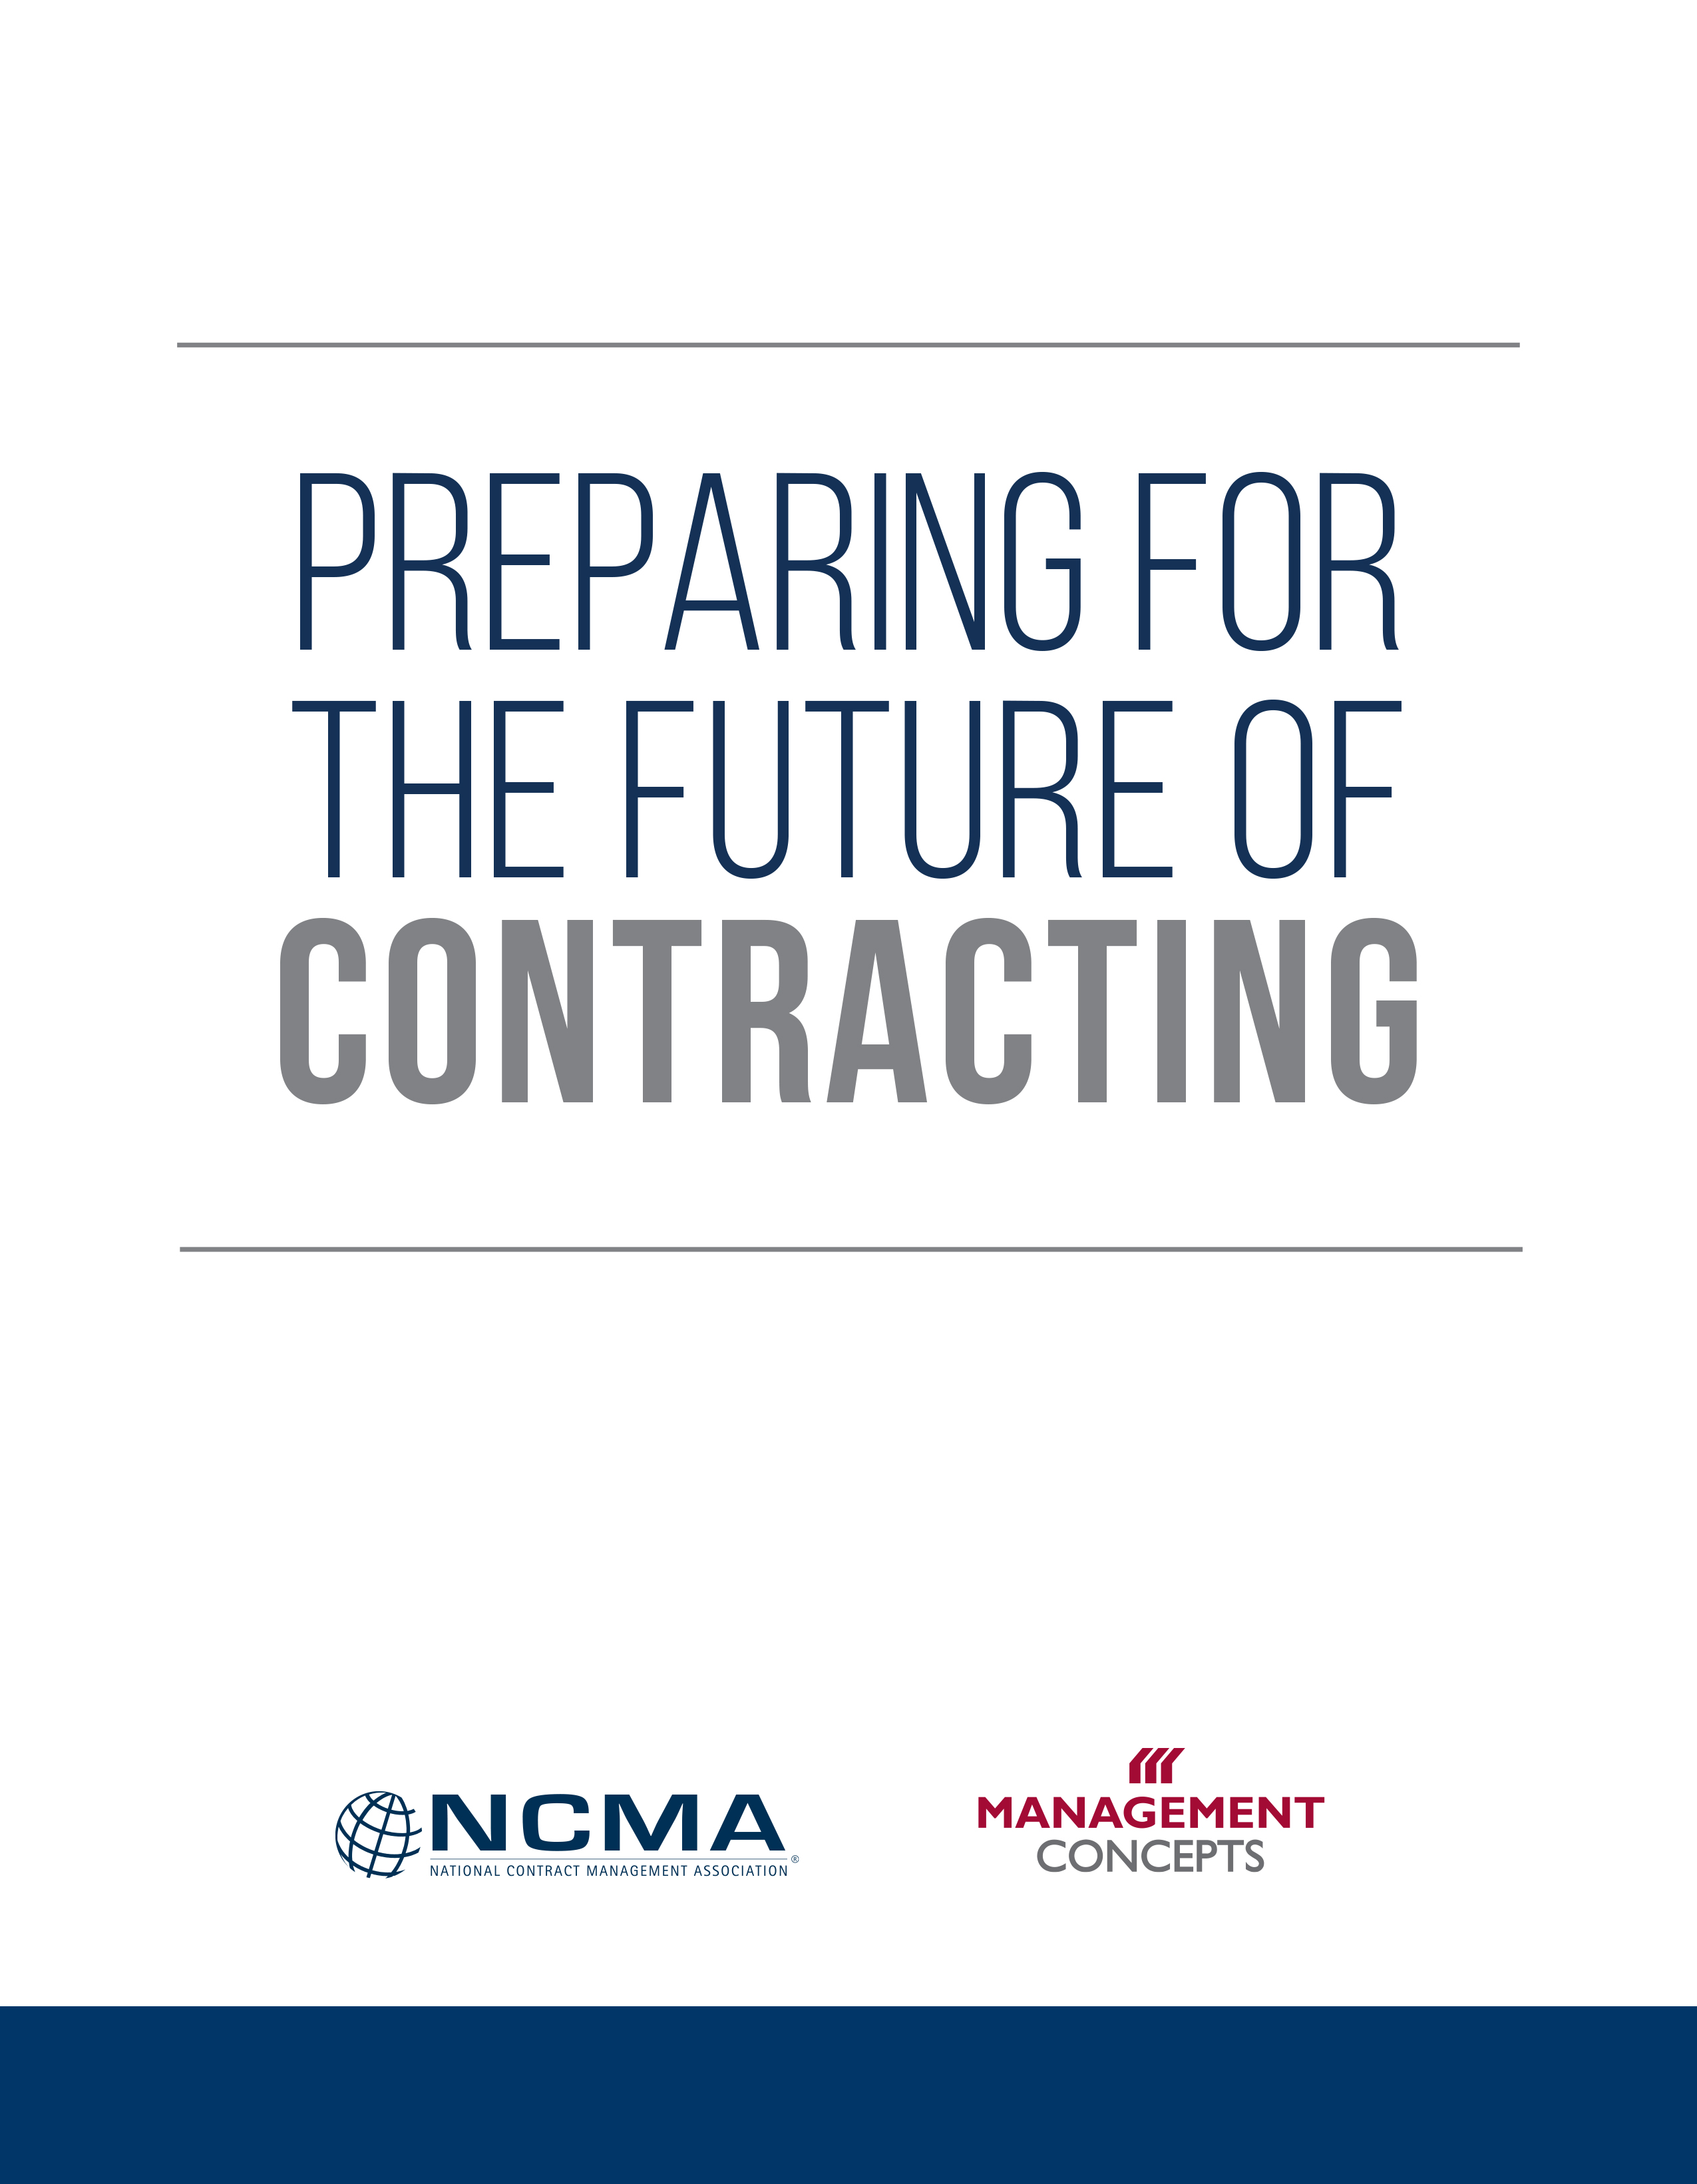 Future of Contracting